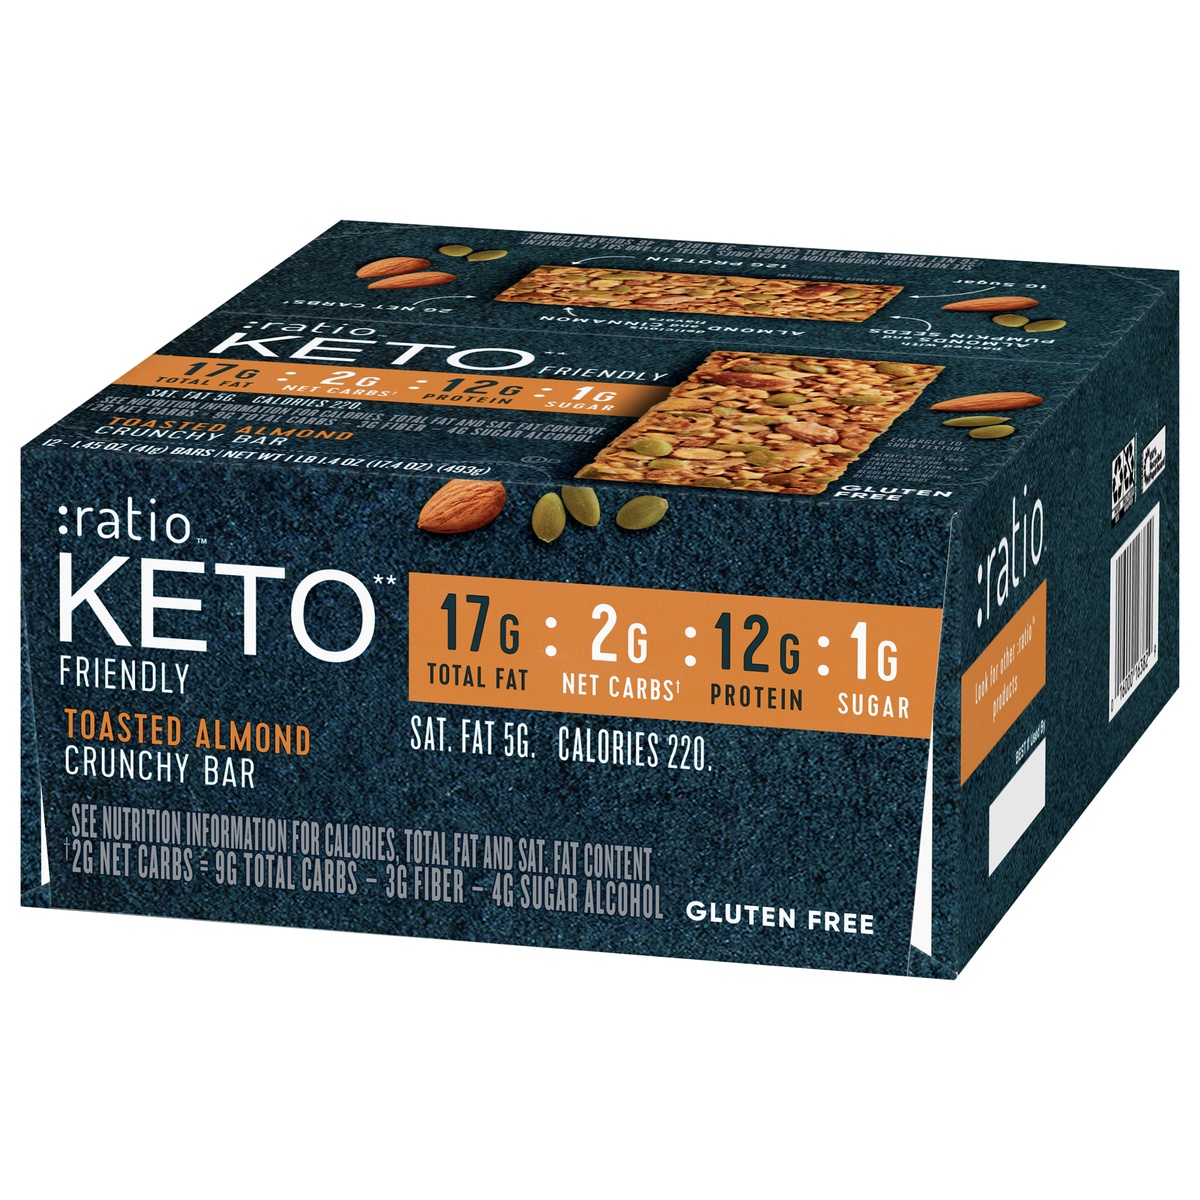 slide 3 of 11, :ratio KETO Friendly Crunchy Bars, Toasted Almond, Gluten Free Snack, 12 ct, 17.4 oz